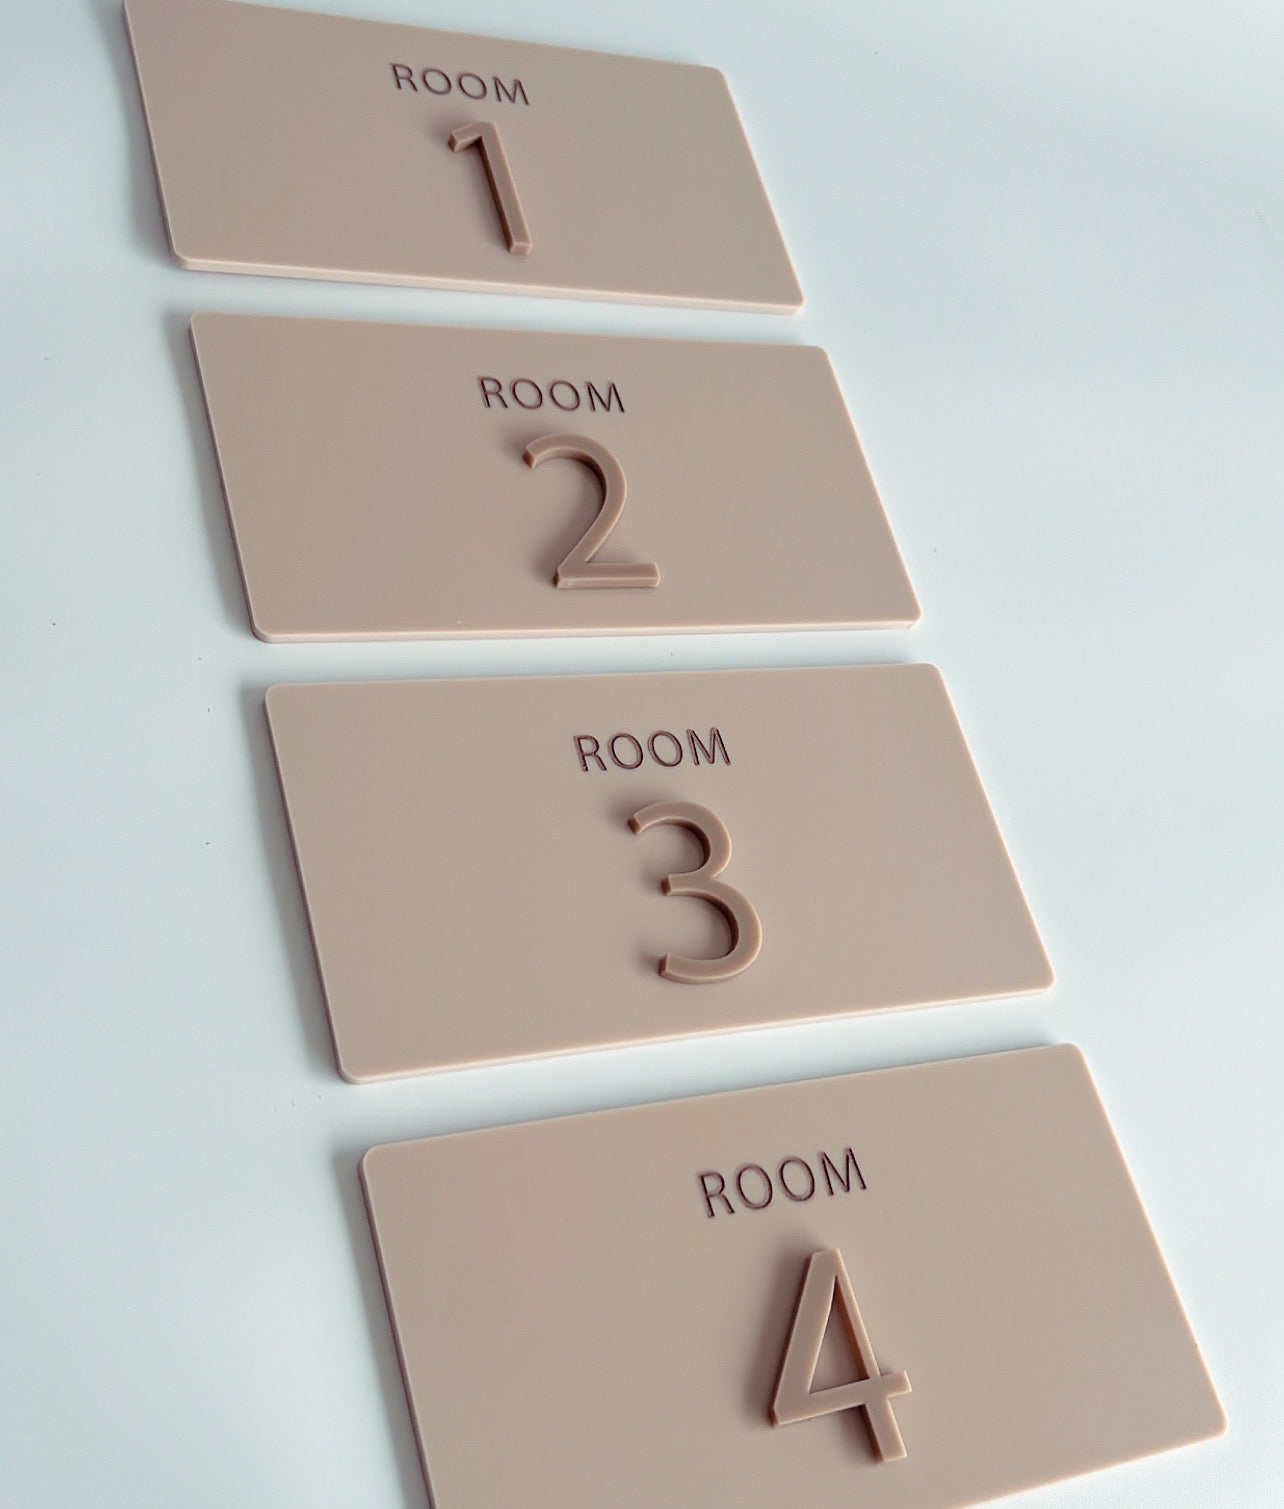 Room signs